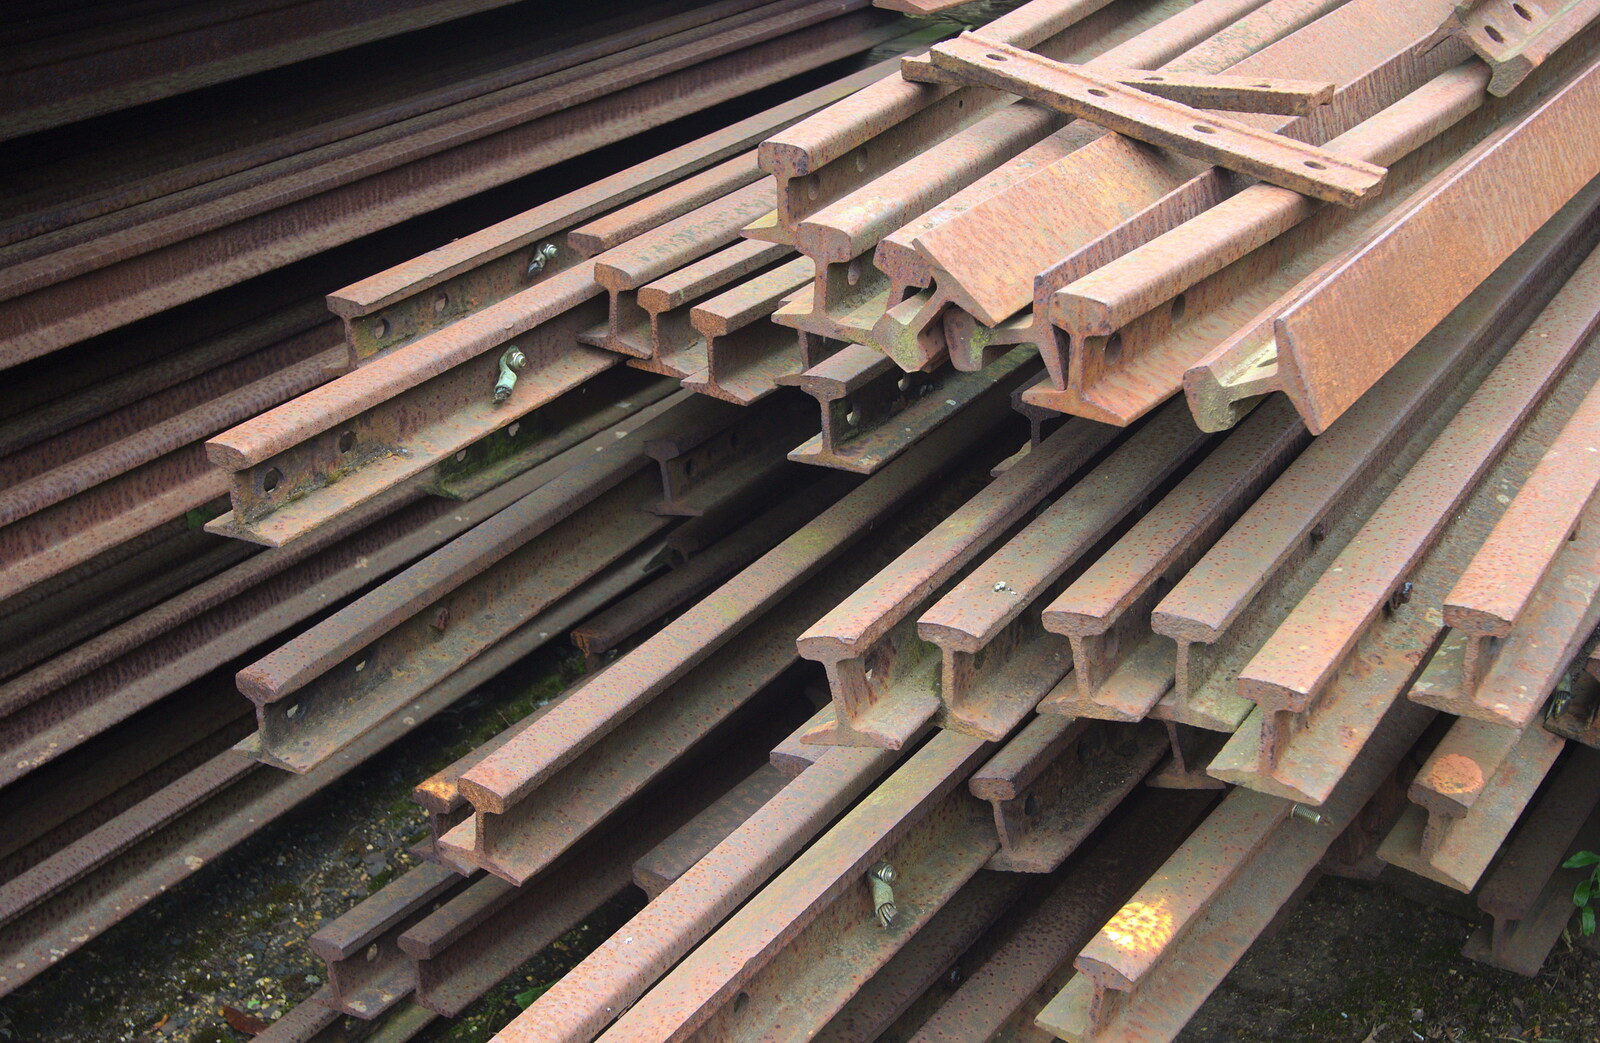 A big pile of tiny narrow-guage railway track from A Day at Bressingham Steam and Gardens, Diss, Norfolk - 18th May 2013